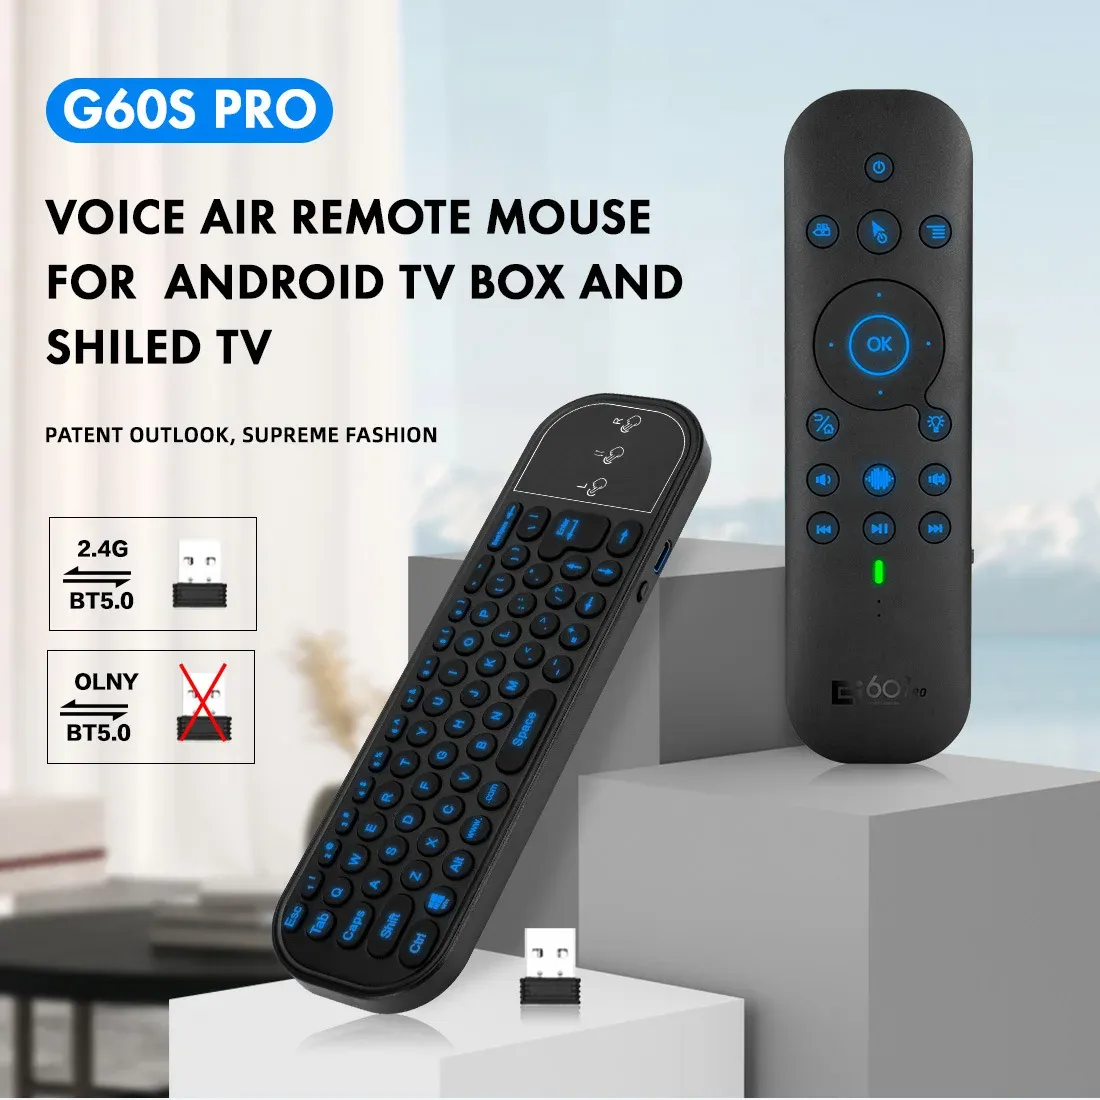 MICE G60S Pro Air Mouse Wireless Voice Remote Control 2.4G BluetoothCompatible Dual Mode IR Leren met achtergrondverlichting voor computer -tv